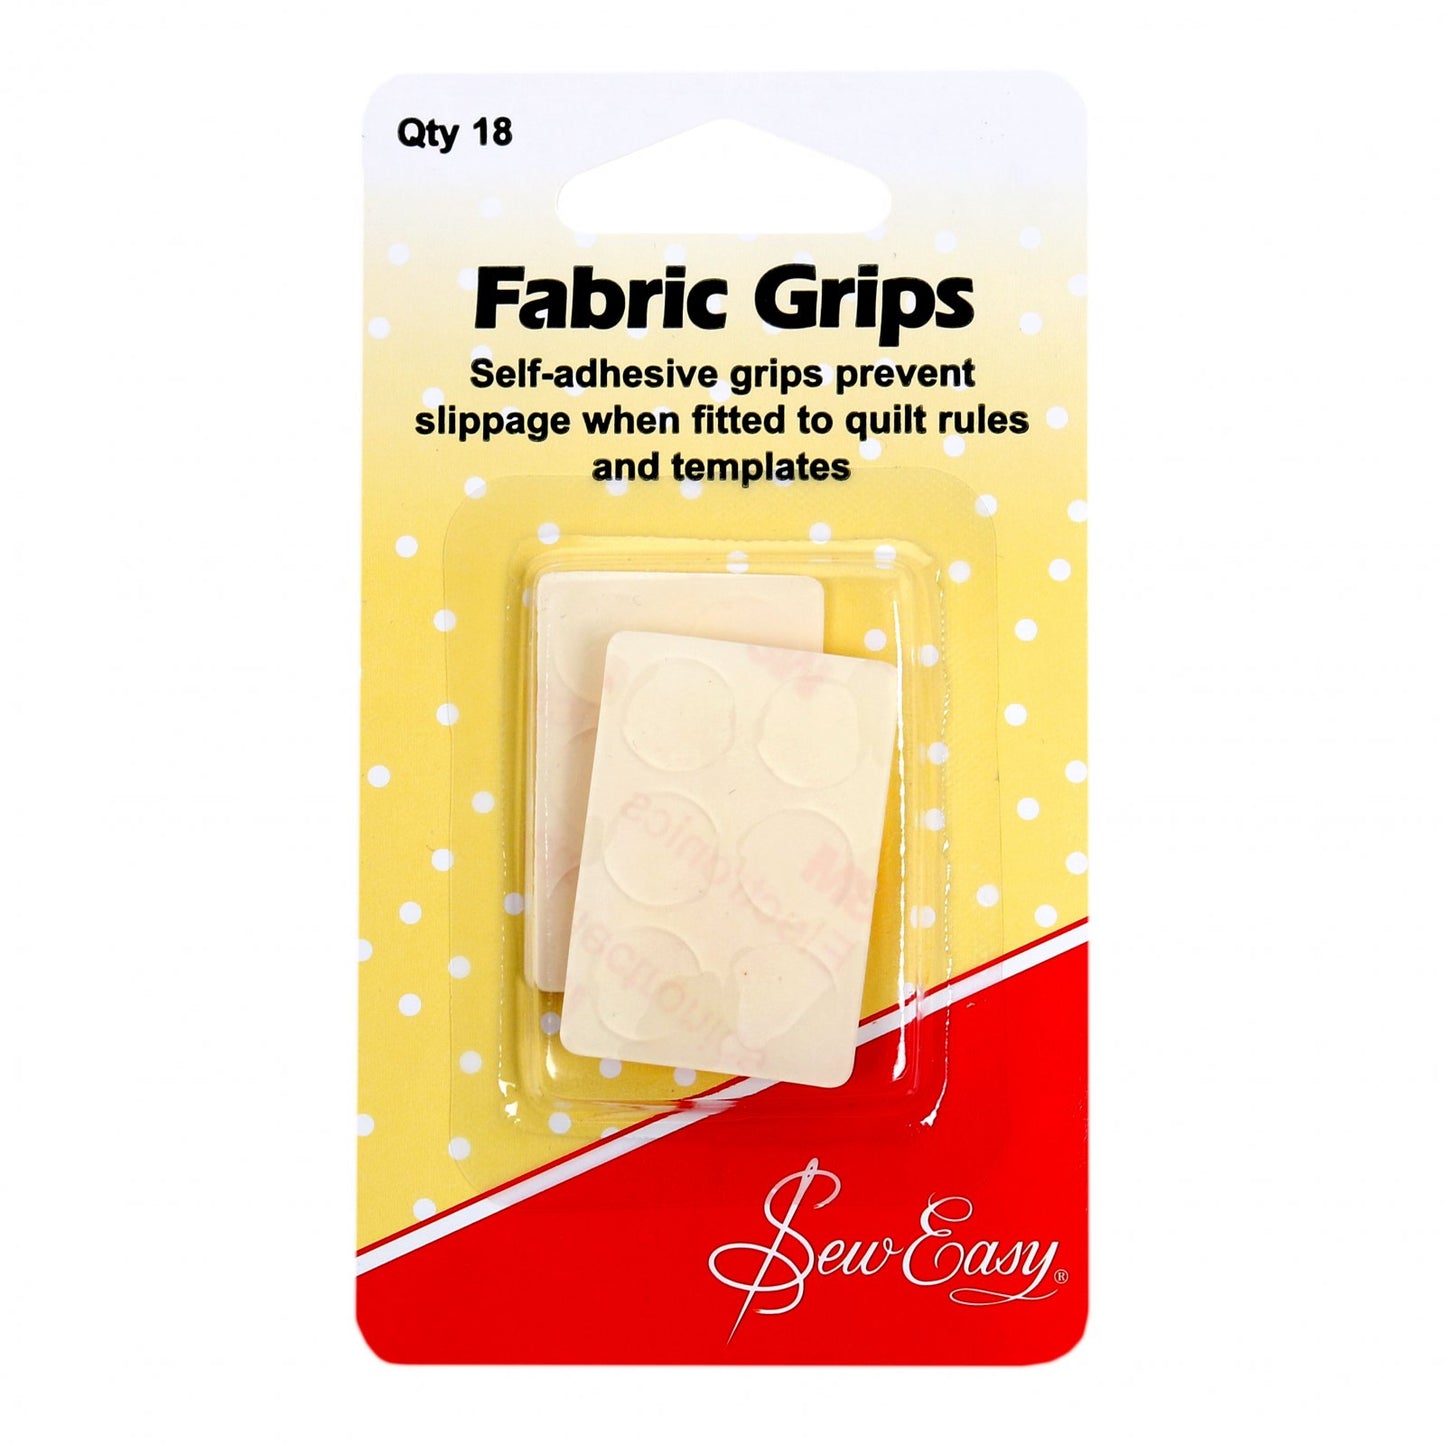 Fabric Grips by Sew Easy - ER899